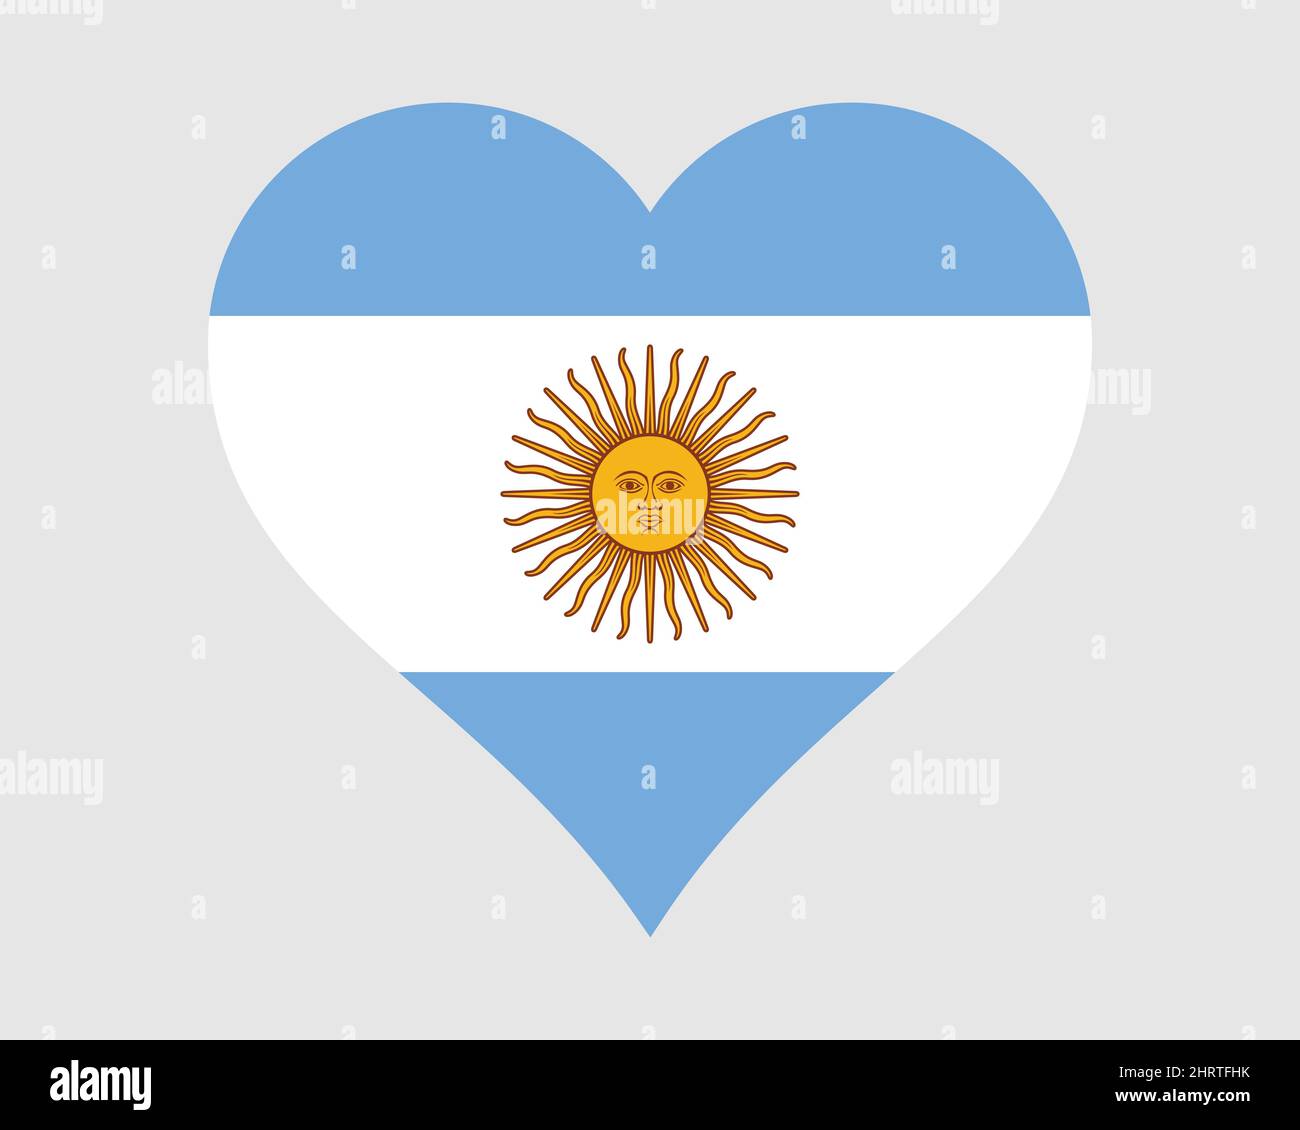 Argentina Heart Flag. Argentinian Argentinean Love Shape Country Nation National Flag. Argentine Republic Banner Icon Sign Symbol. EPS Vector Illustra Stock Vector